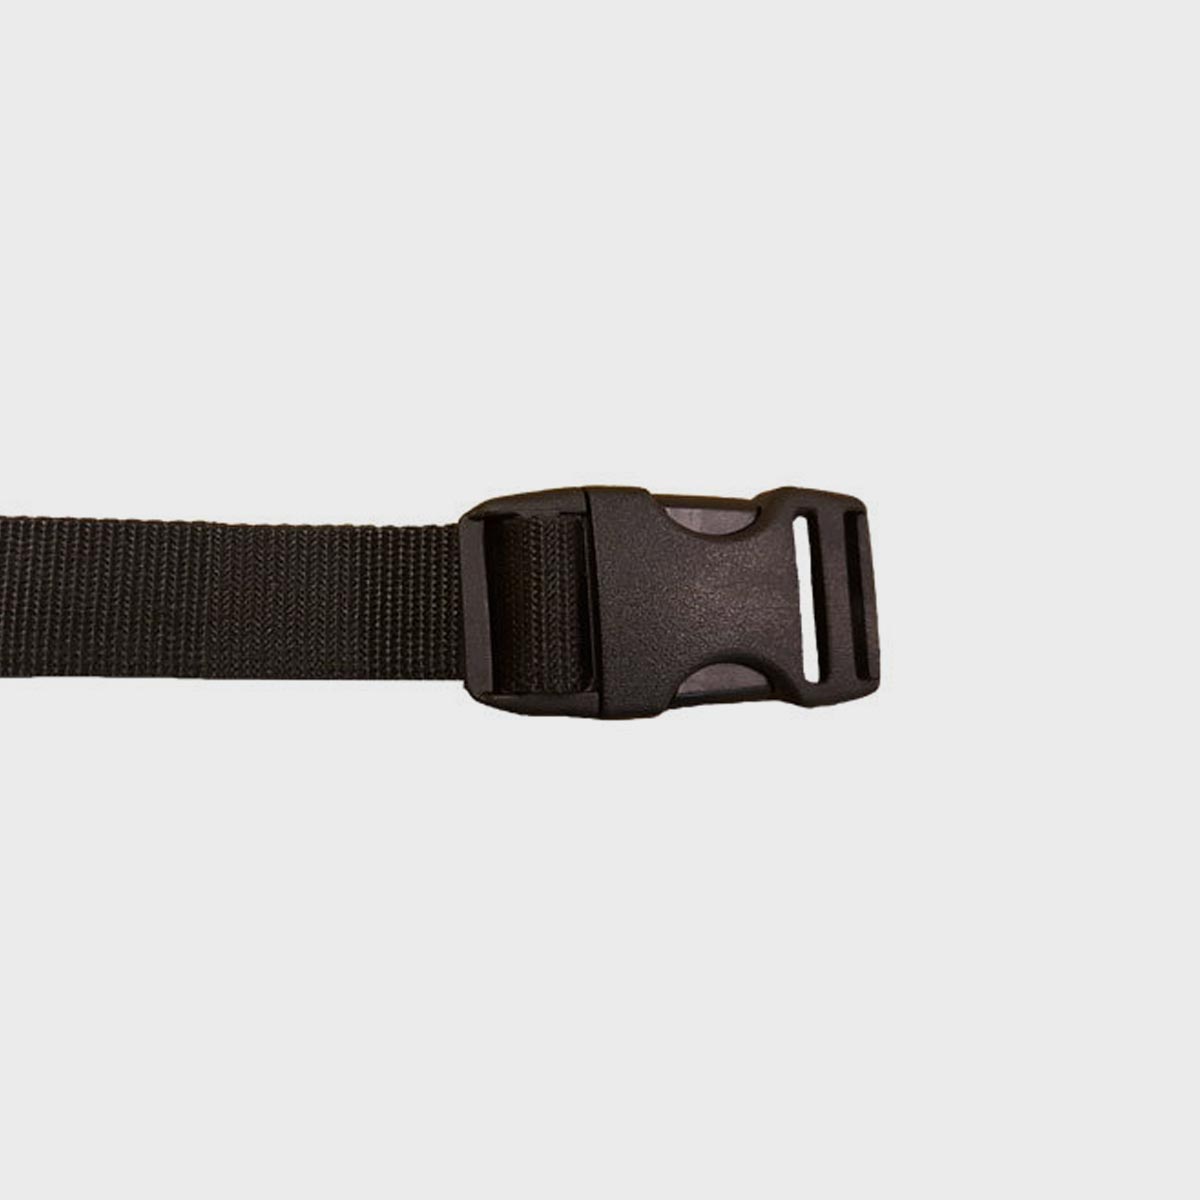 Clips Buckles Side Release Clip bag Accessory Strap Buckle Black Plastic  Buckle